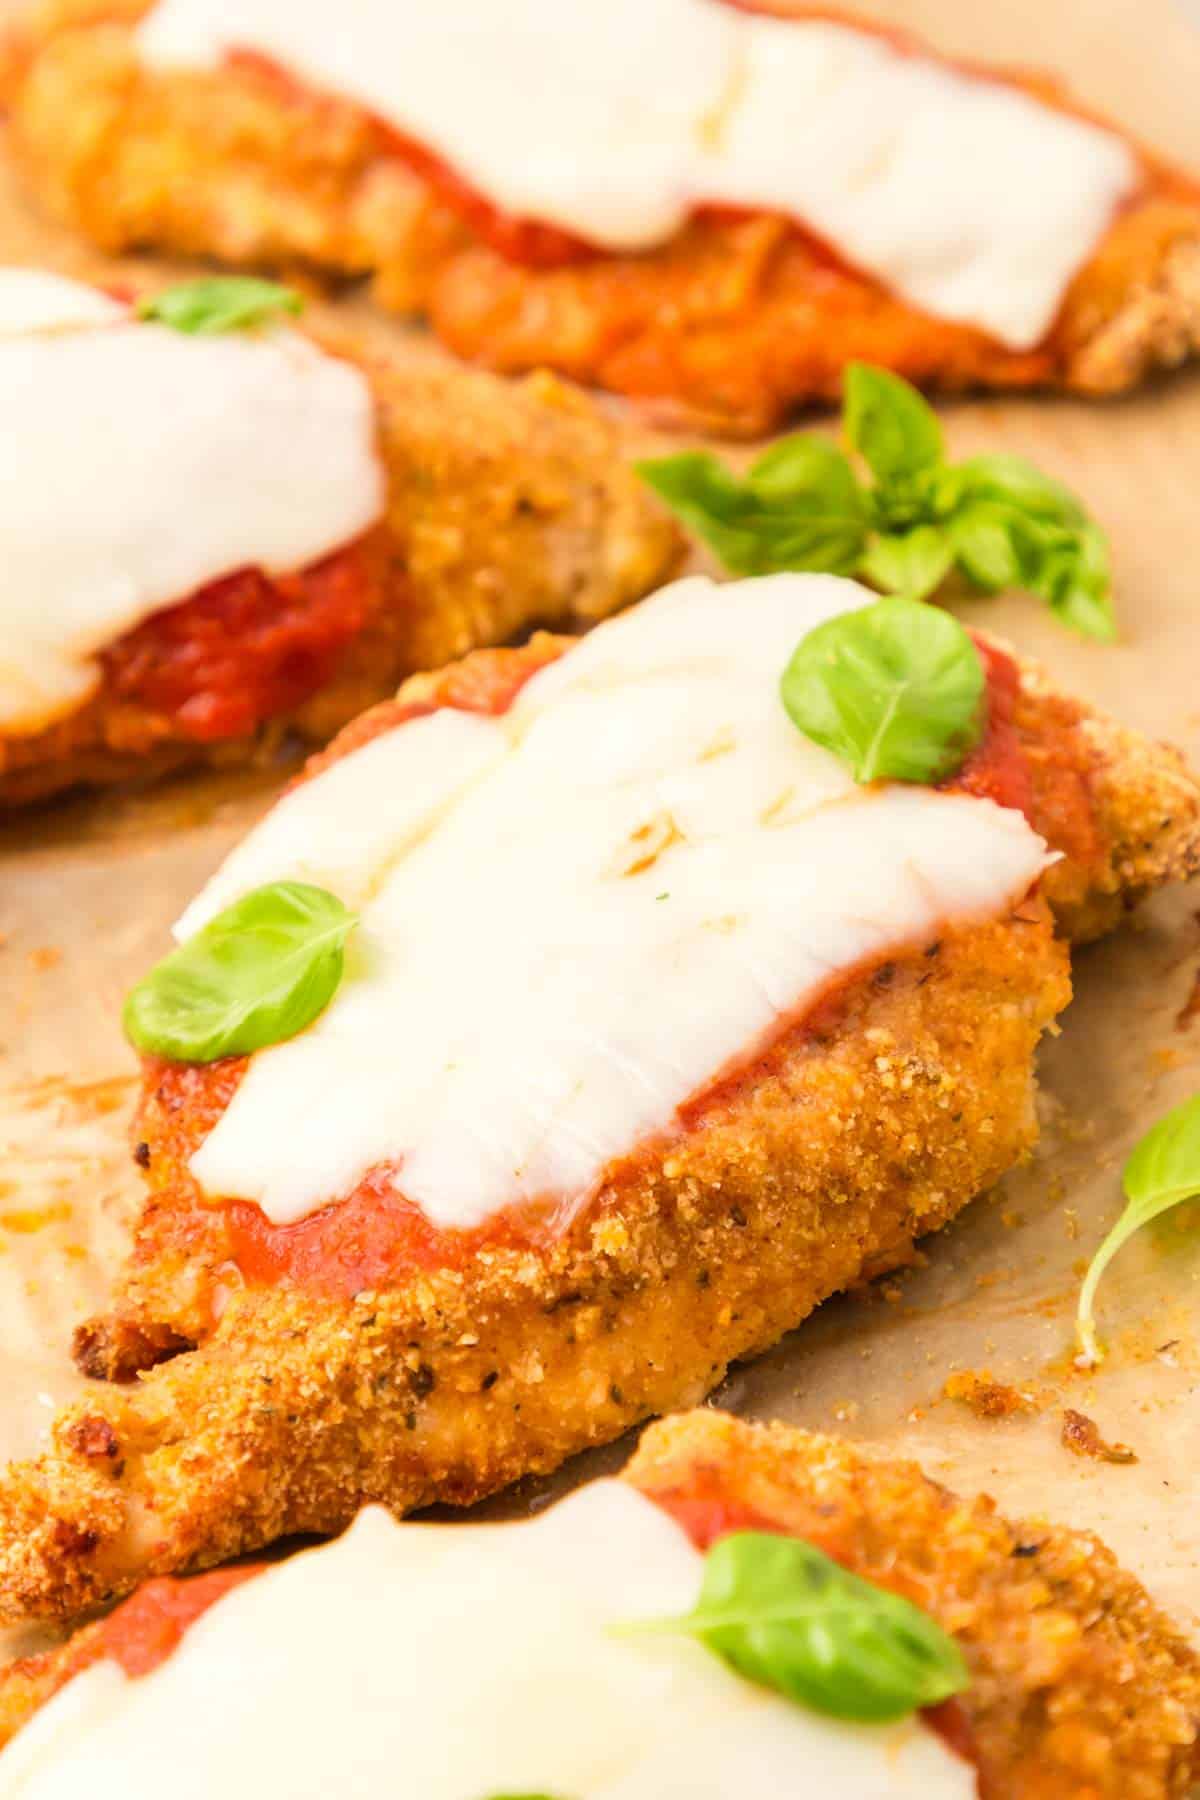 Oven Baked Chicken Parmesan is a delicious parmesan breaded chicken breast recipe topped with marinara and mozzarella cheese.